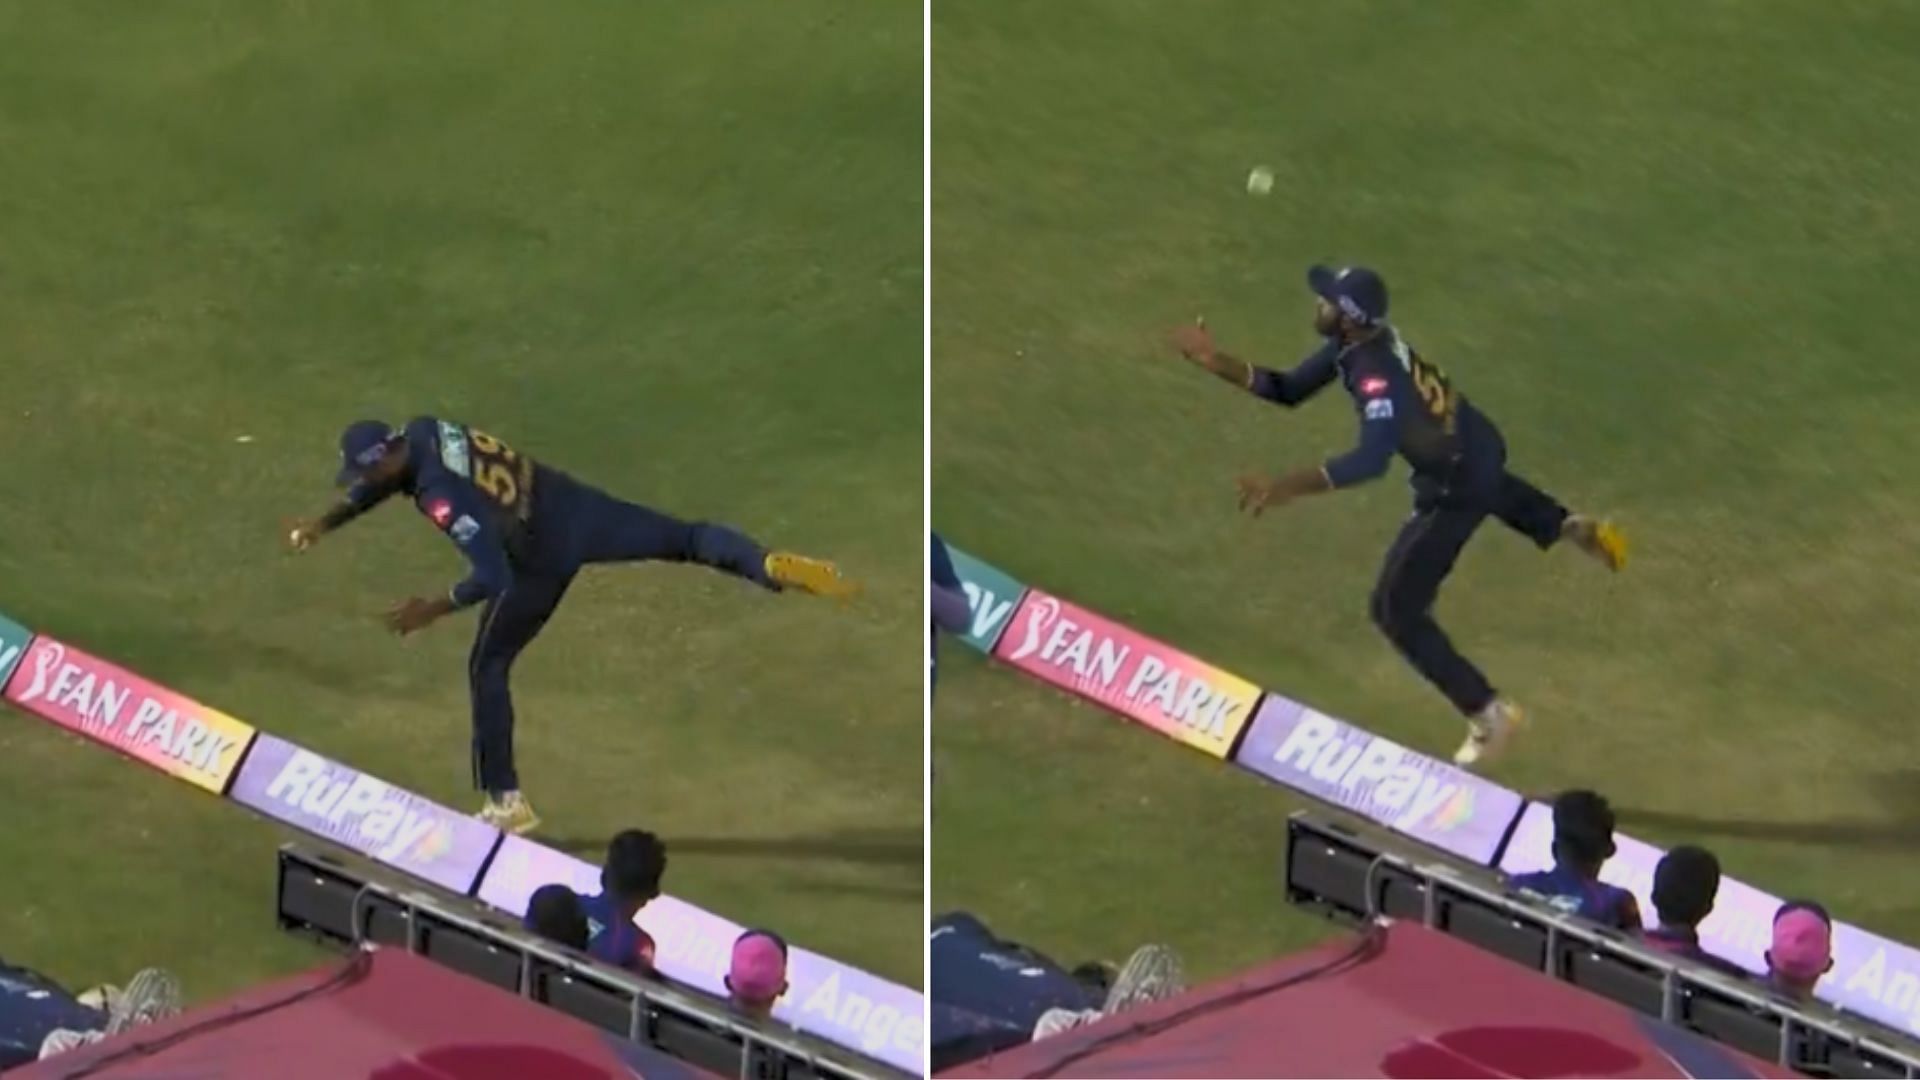 Snippets from a truly fantastic catch by Vijay Shankar